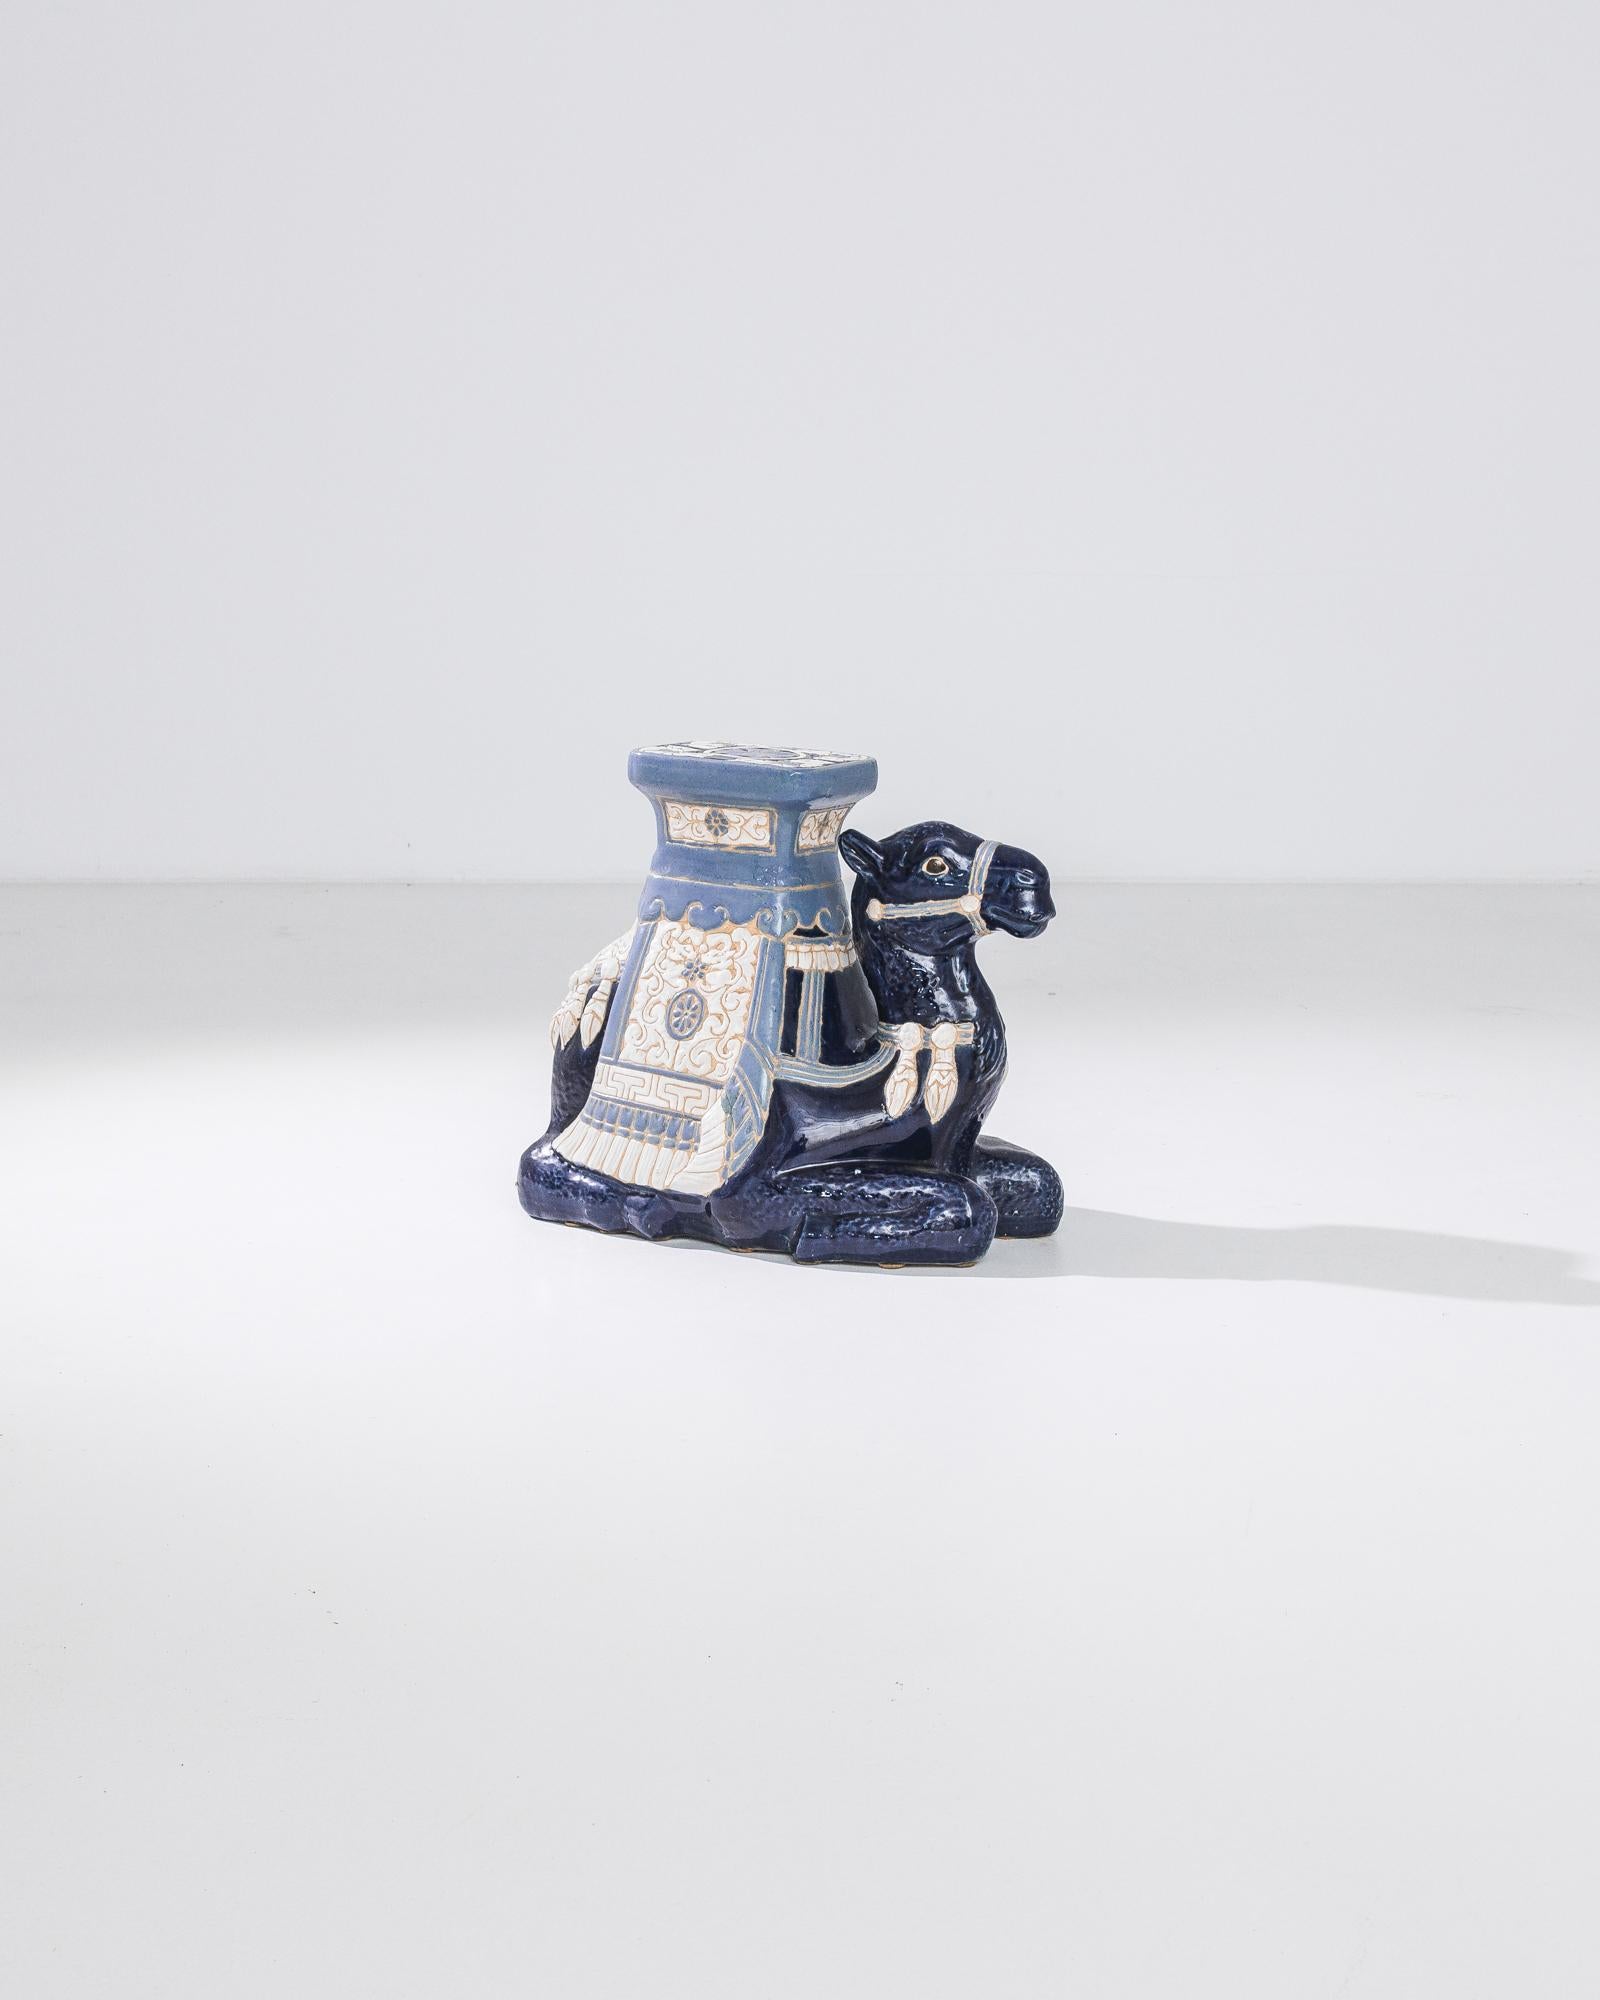 A ceramic decoration from 1960s France in the shape of a blue camel. A saddle seat and blanket are glazed with bright colors; the assortment of delicate patterns — reflecting Chinese and Arabic influences — suggest the romance of the Silk Road. The